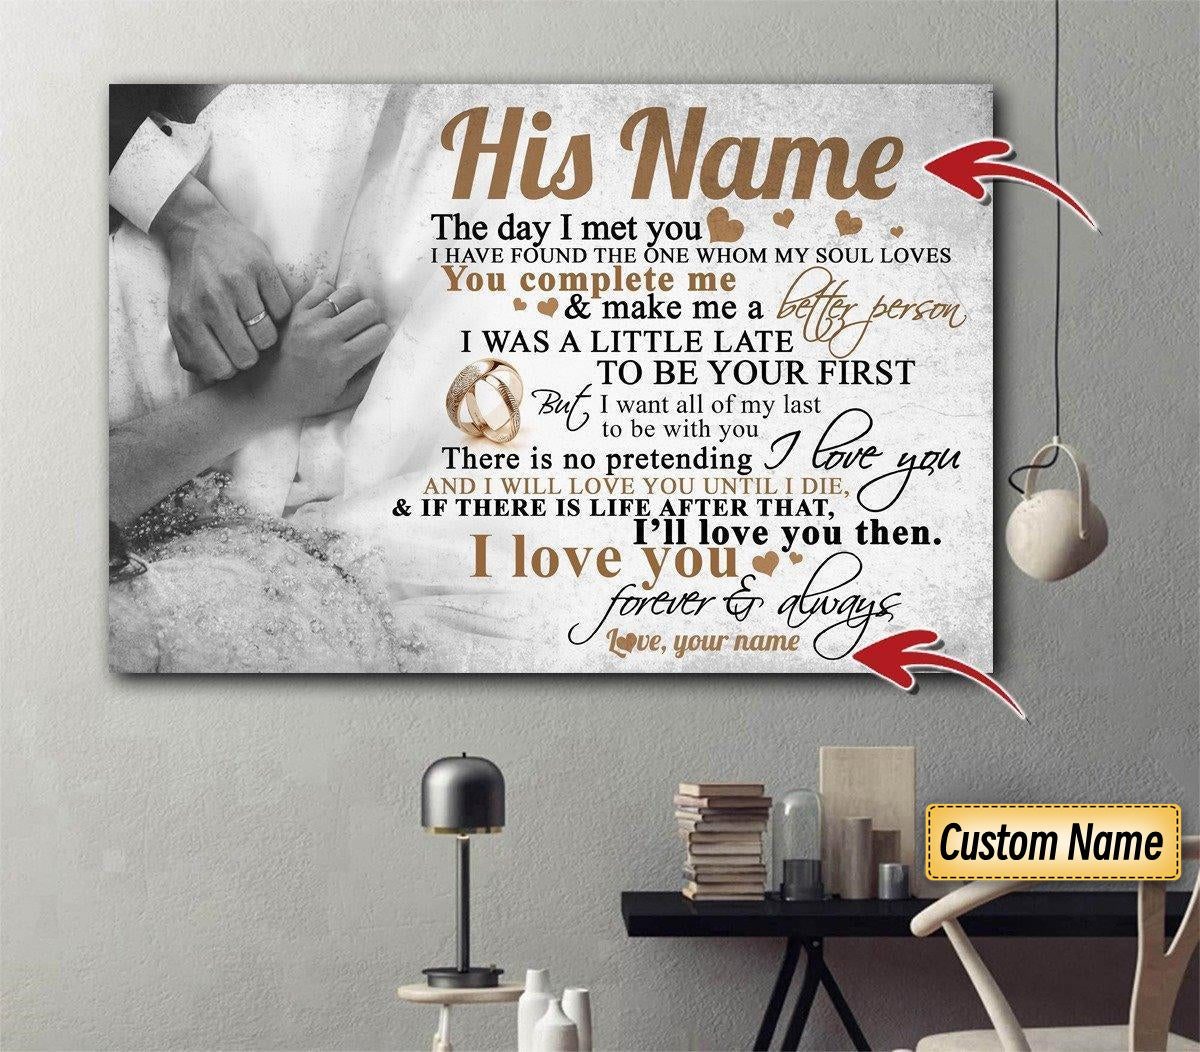 Couple Gift Poster, Wall Decor, Custom Name On Poster, Touching Quote, High Quality